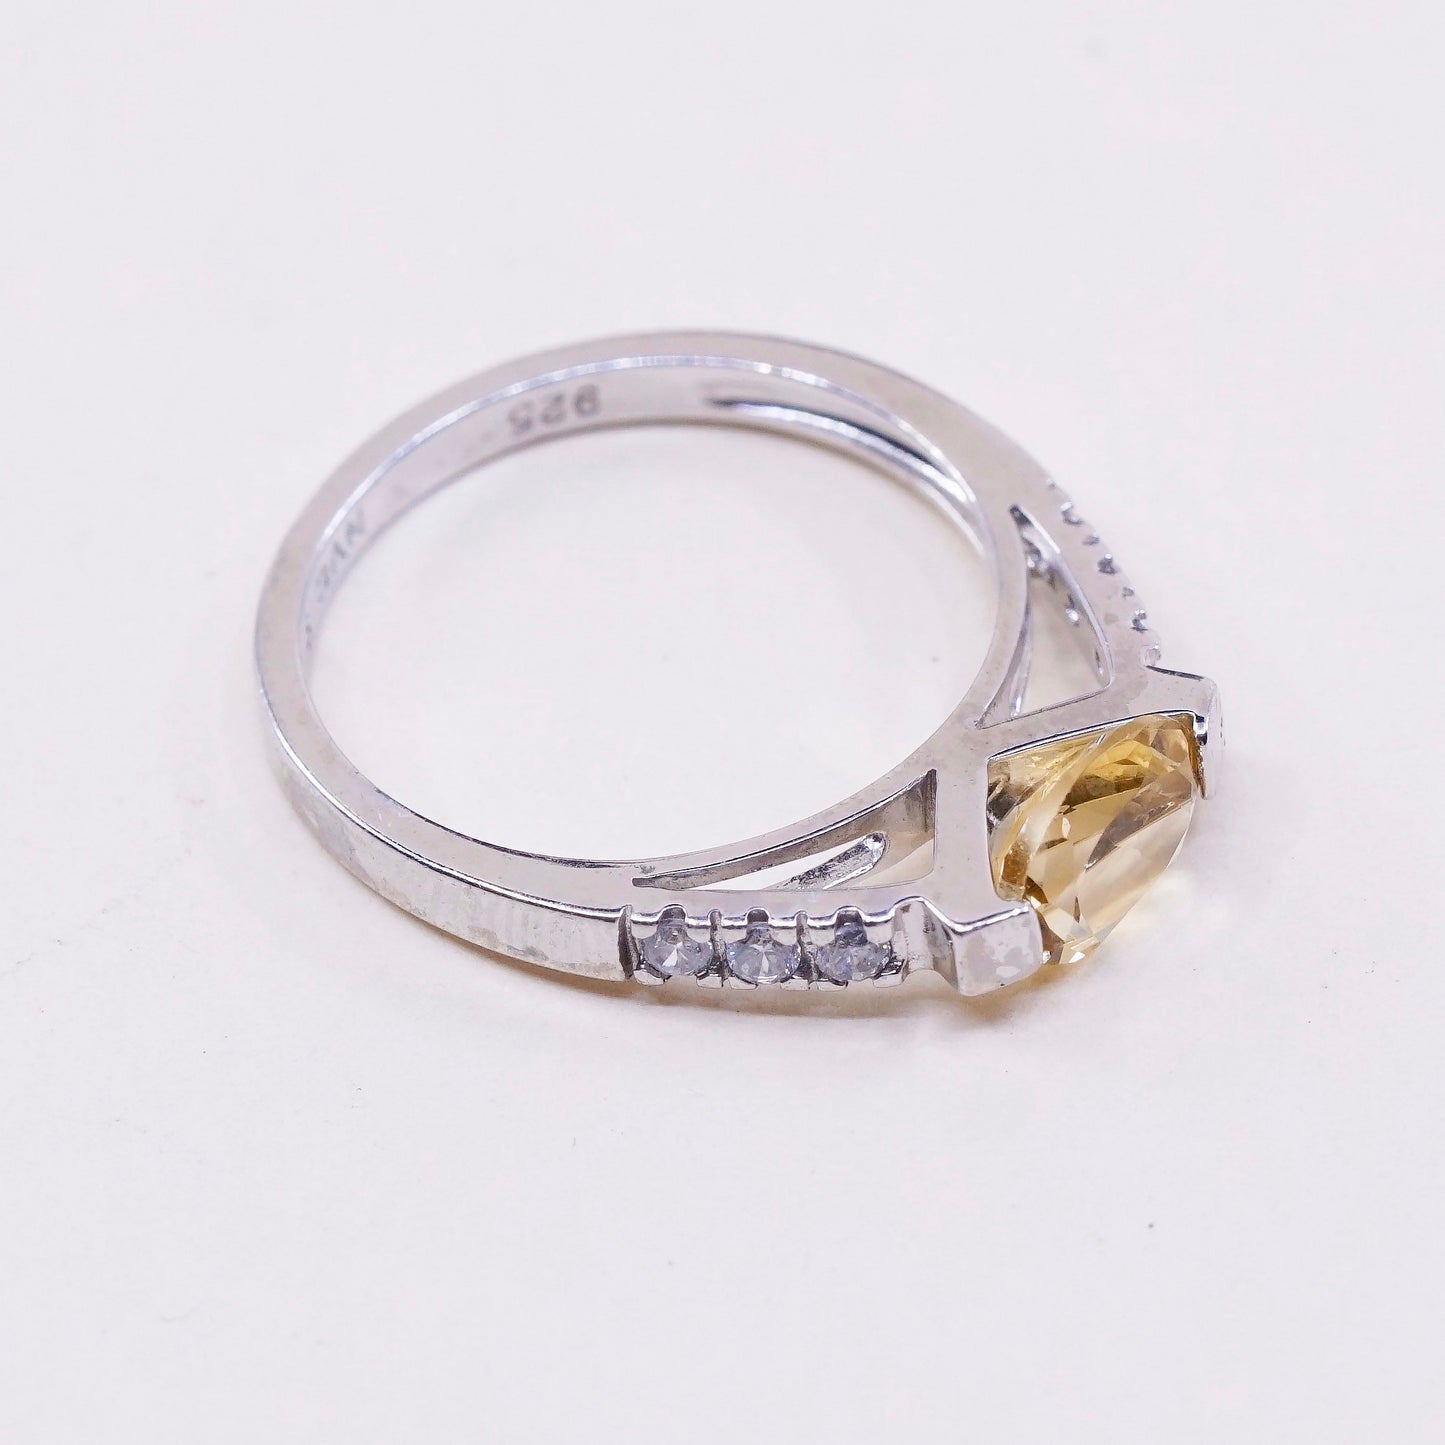 Size 9.25, vintage NVC Sterling silver ring, 925 with citrine and cz